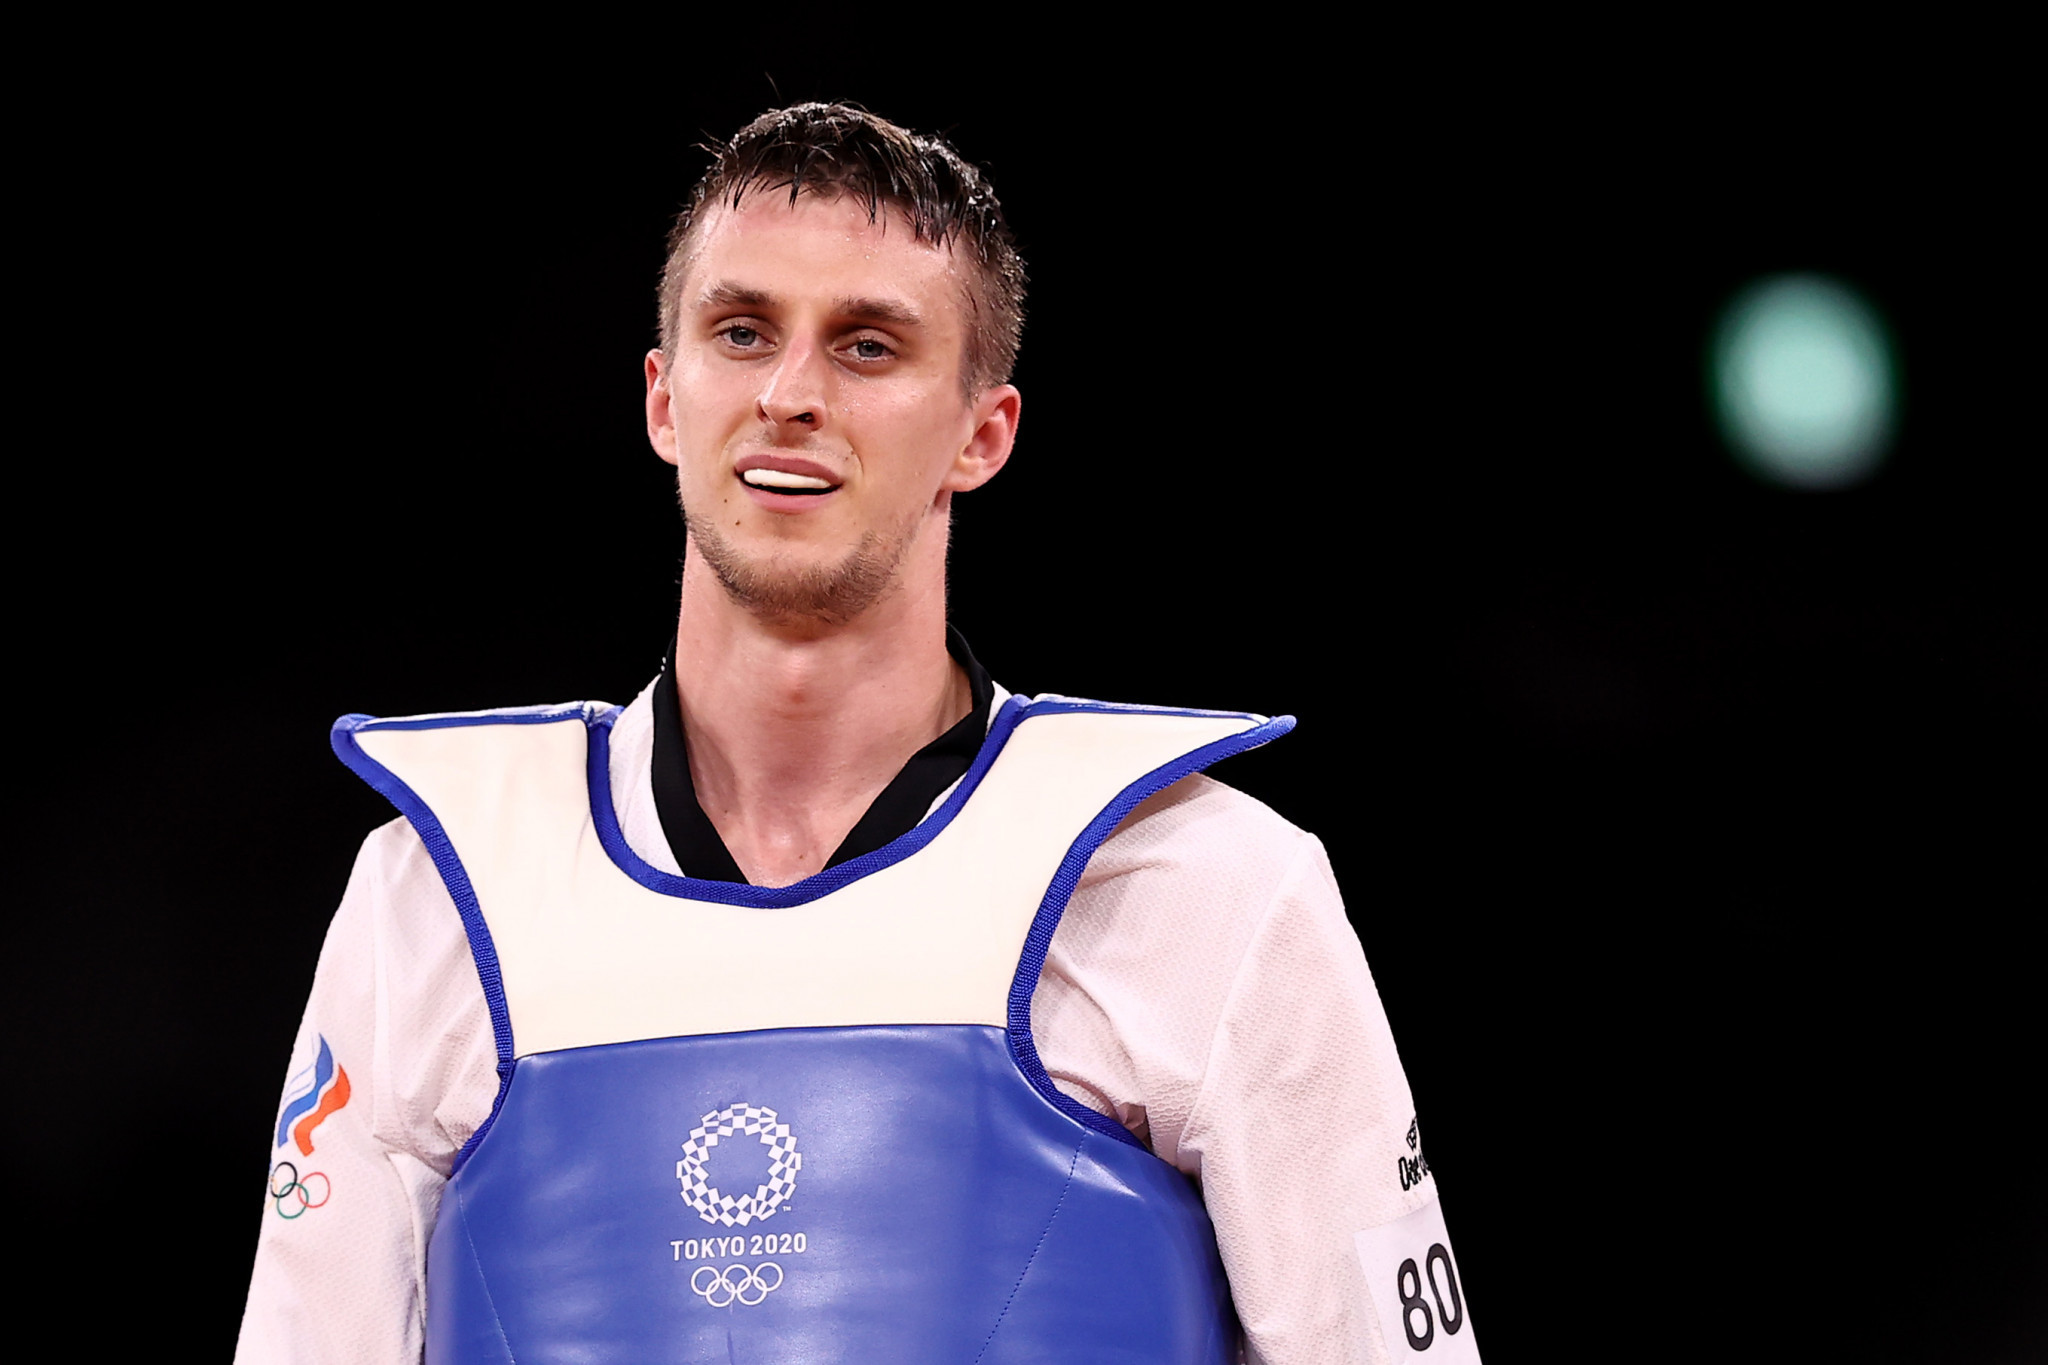 Vladislav Larin, pictured, and Maxim Khramtsov were not accredited for the World Championships, World Taekwondo has said ©Getty Images